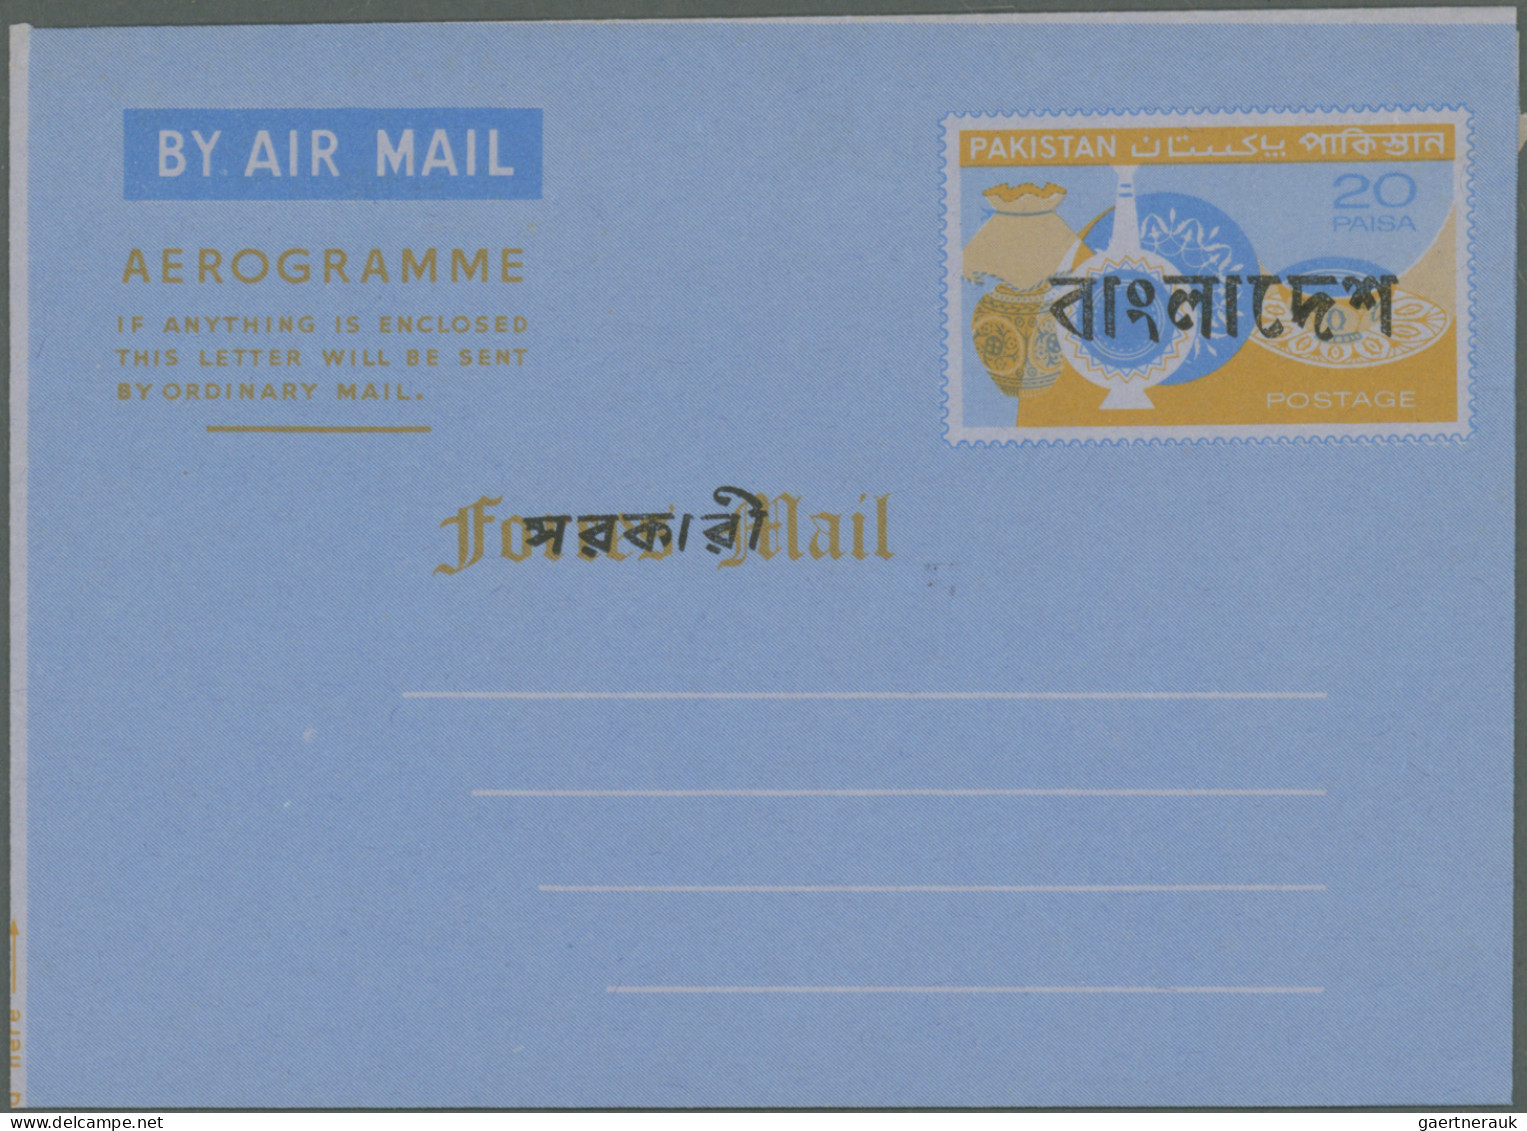 Bangladesch - postal stationery: 1972/1992, comprehensive collection of apprx. 8